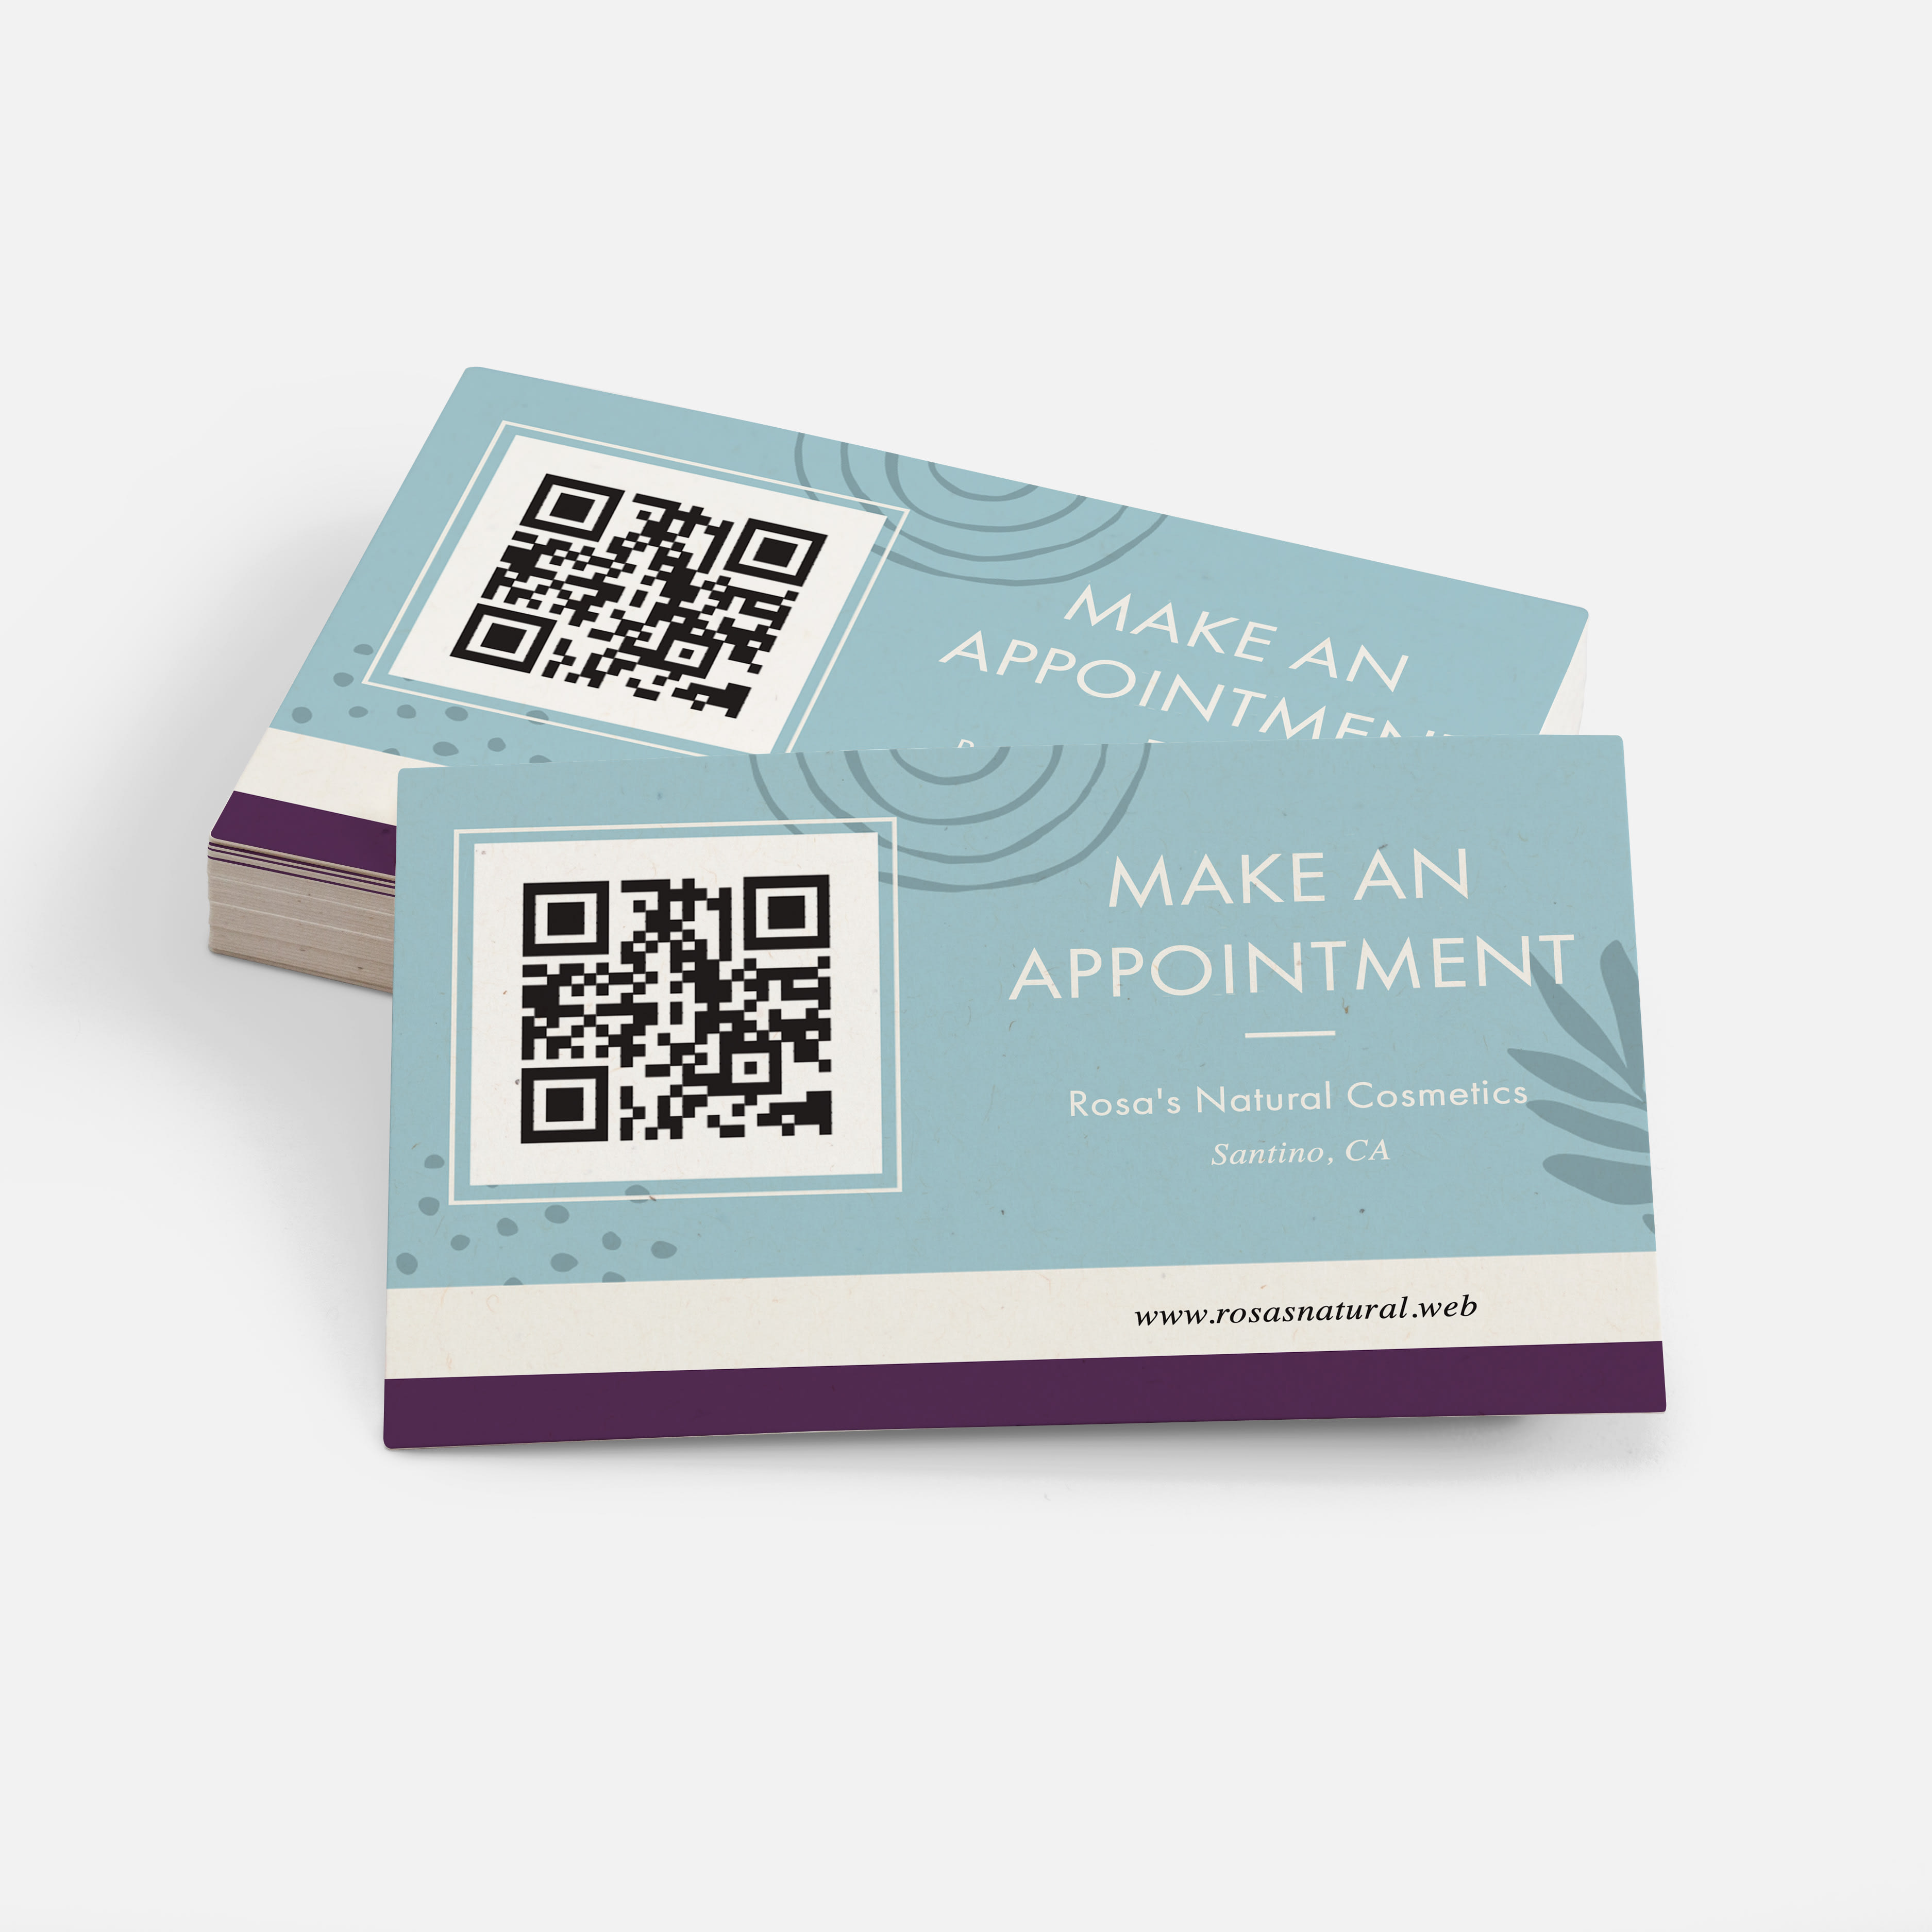 How To Use Qr Codes For Small Businesses | Vistaprint Us